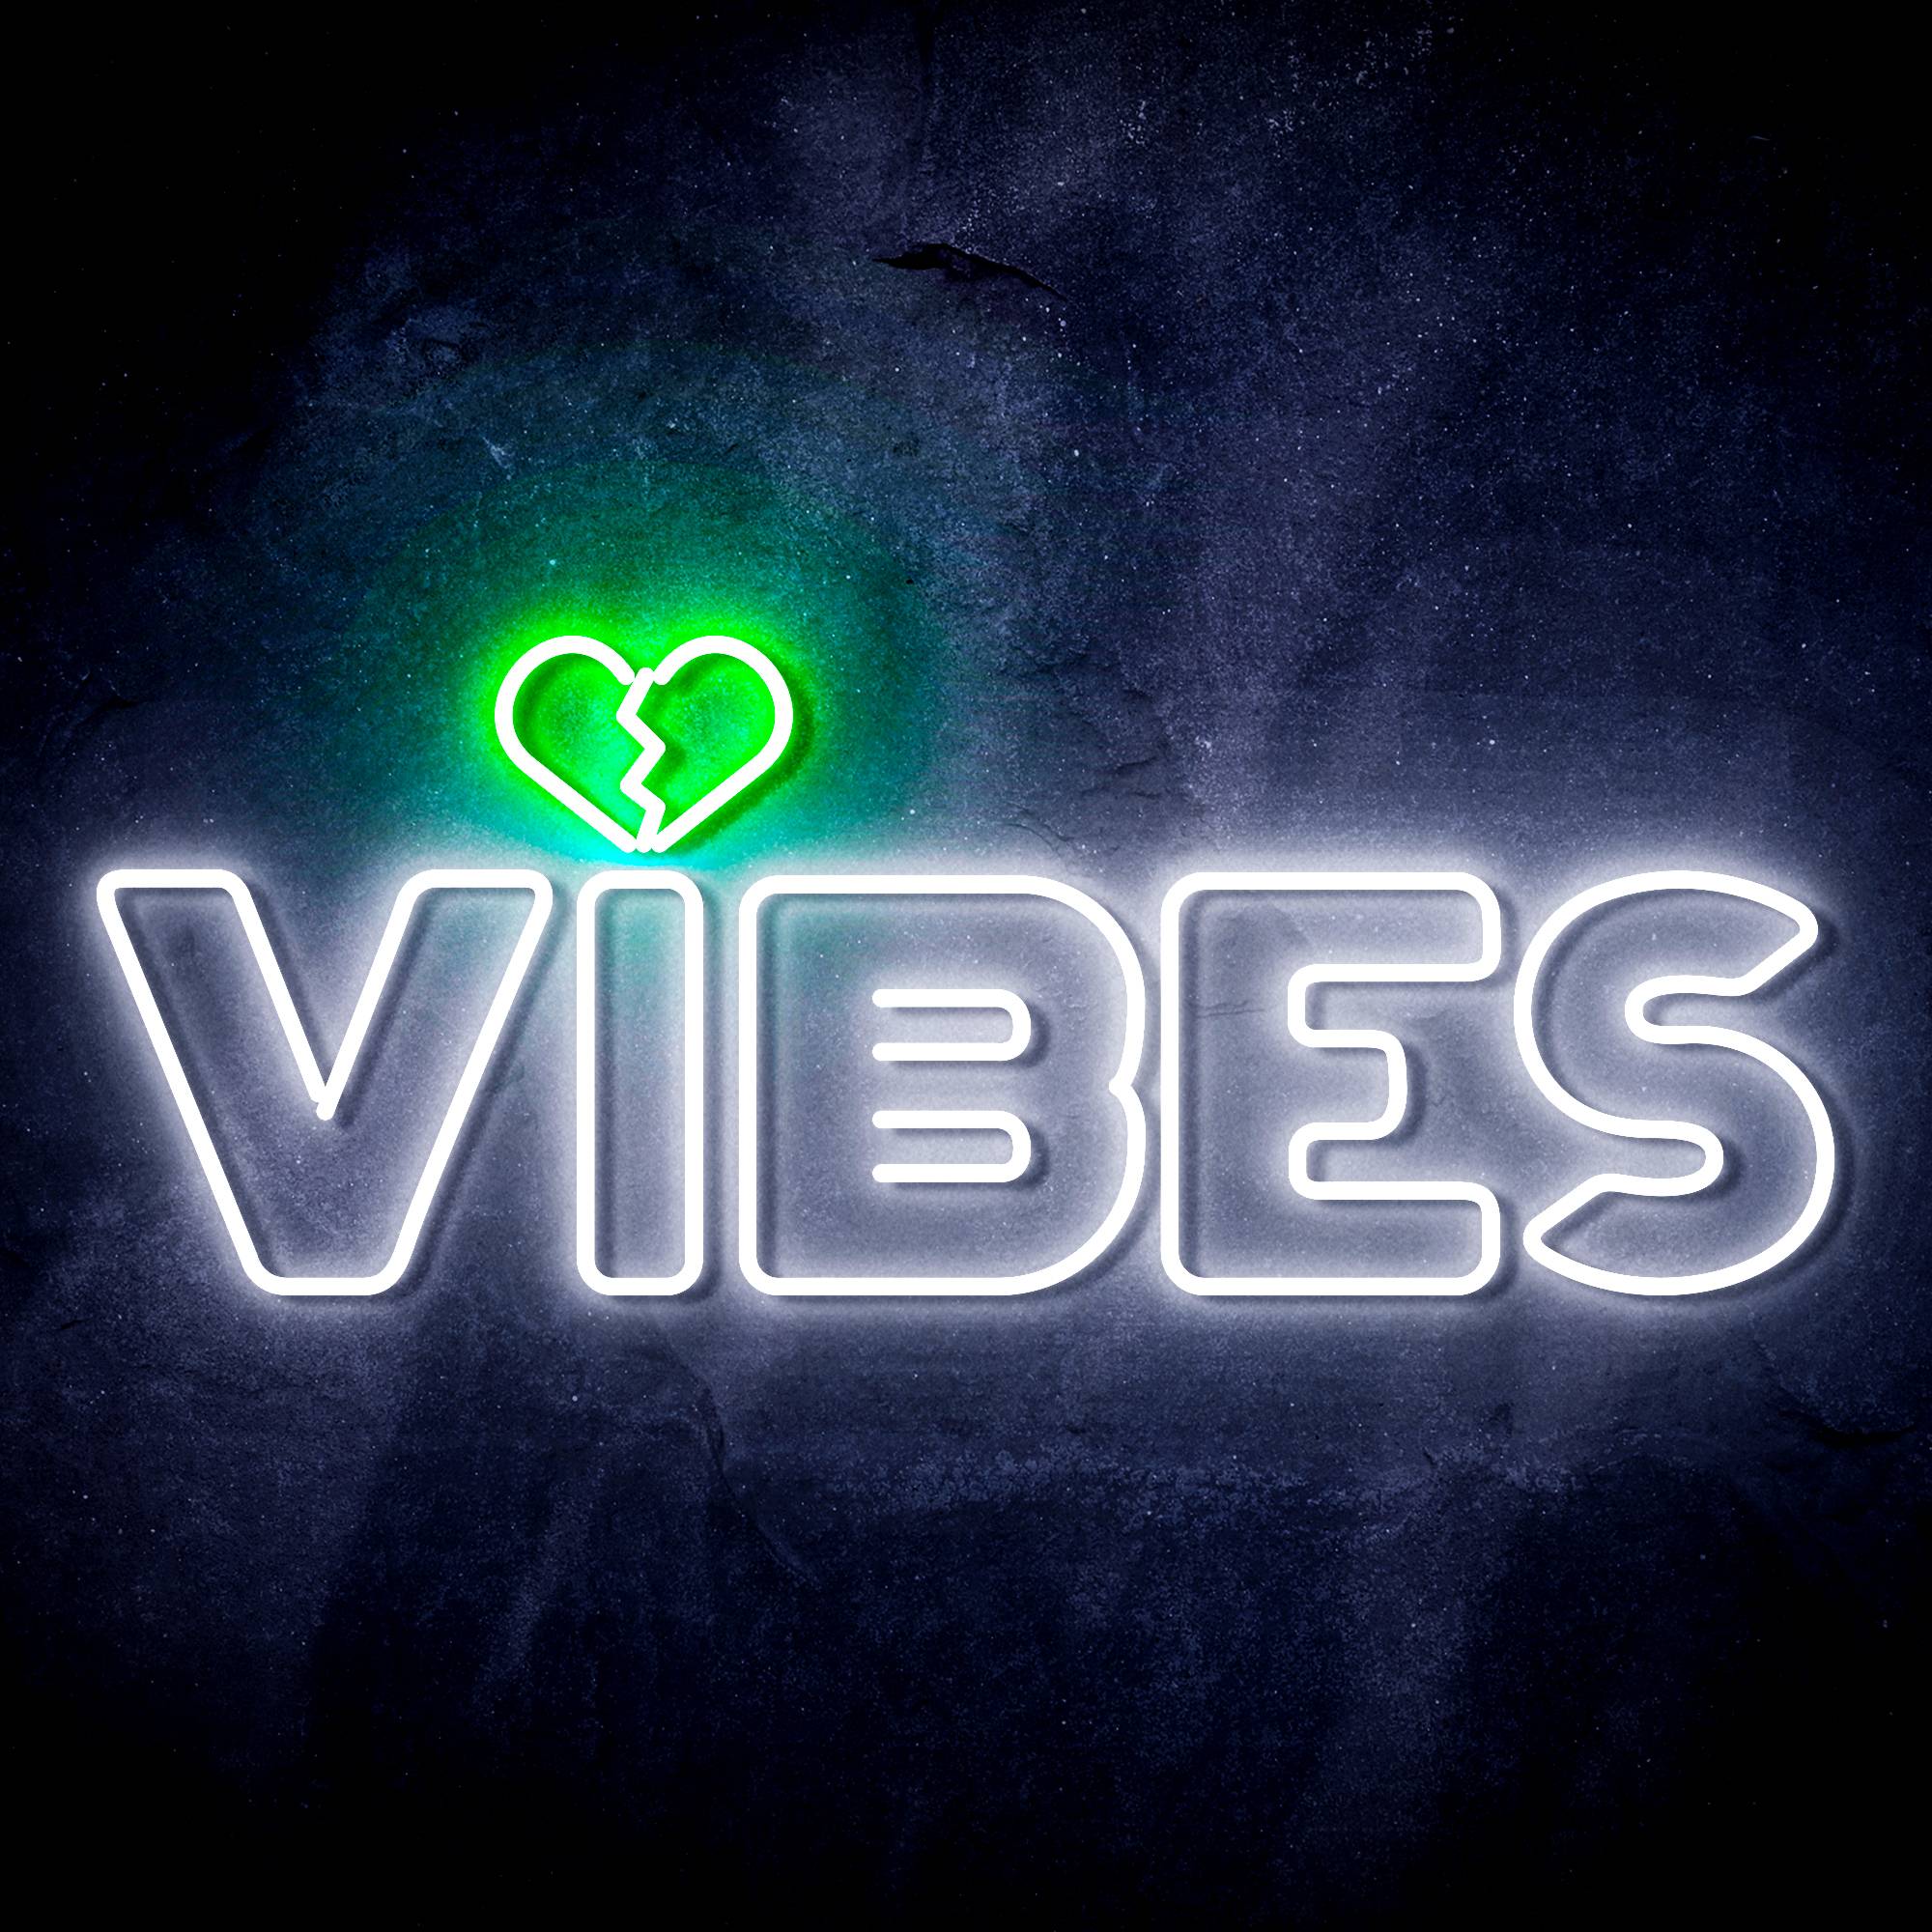 VIBES with Heart LED Neon Sign